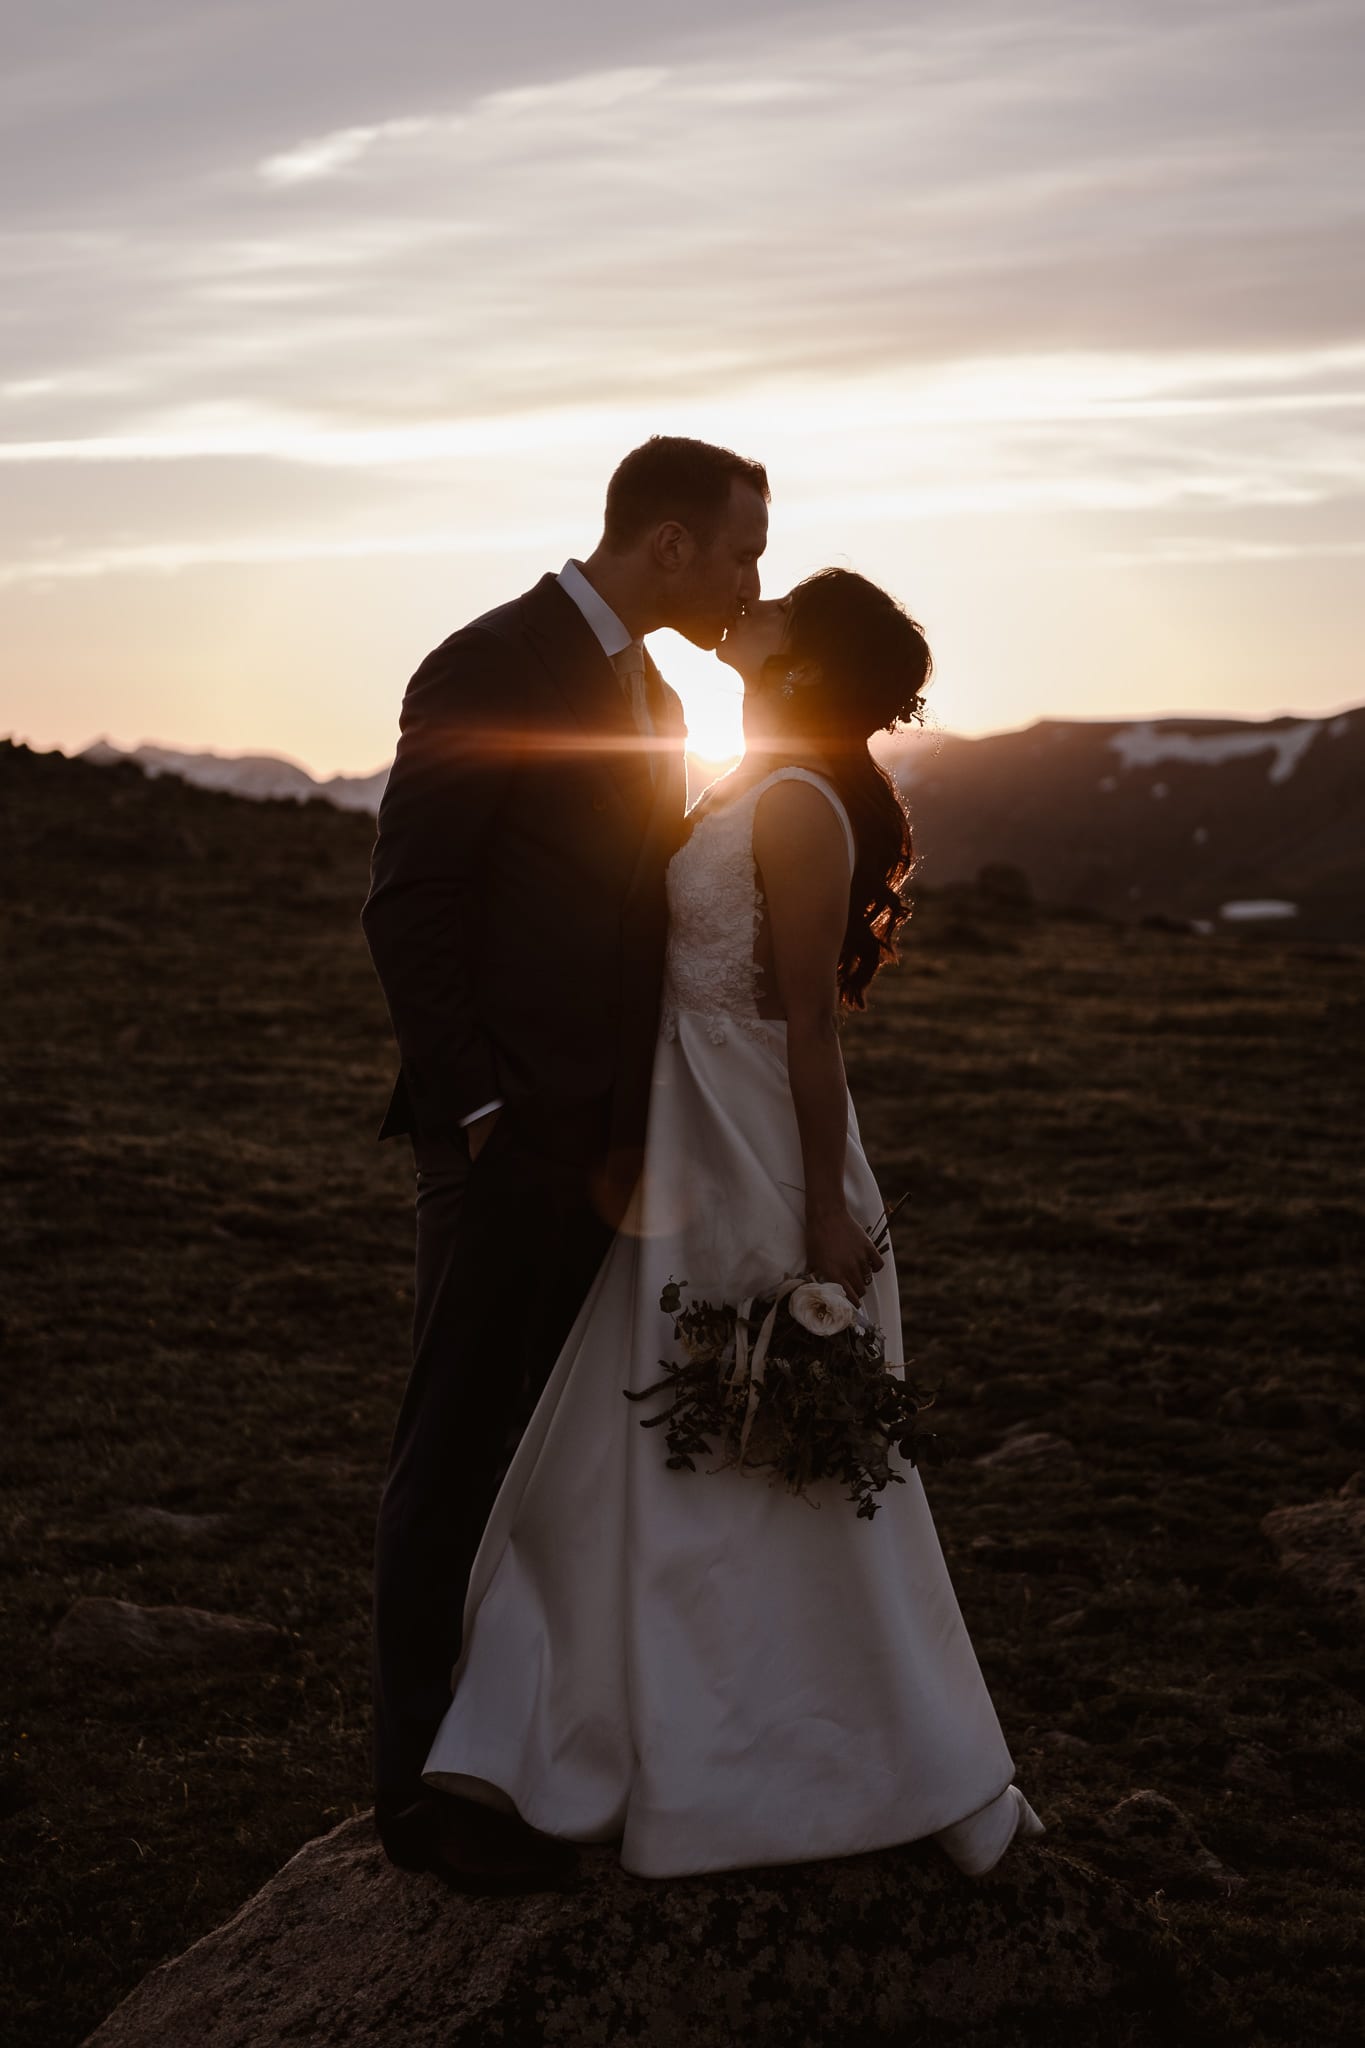 Trail Ridge Road Elopement Photographer, Colorado adventure wedding photography, mountain hiking elopement, bride and groom at sunset